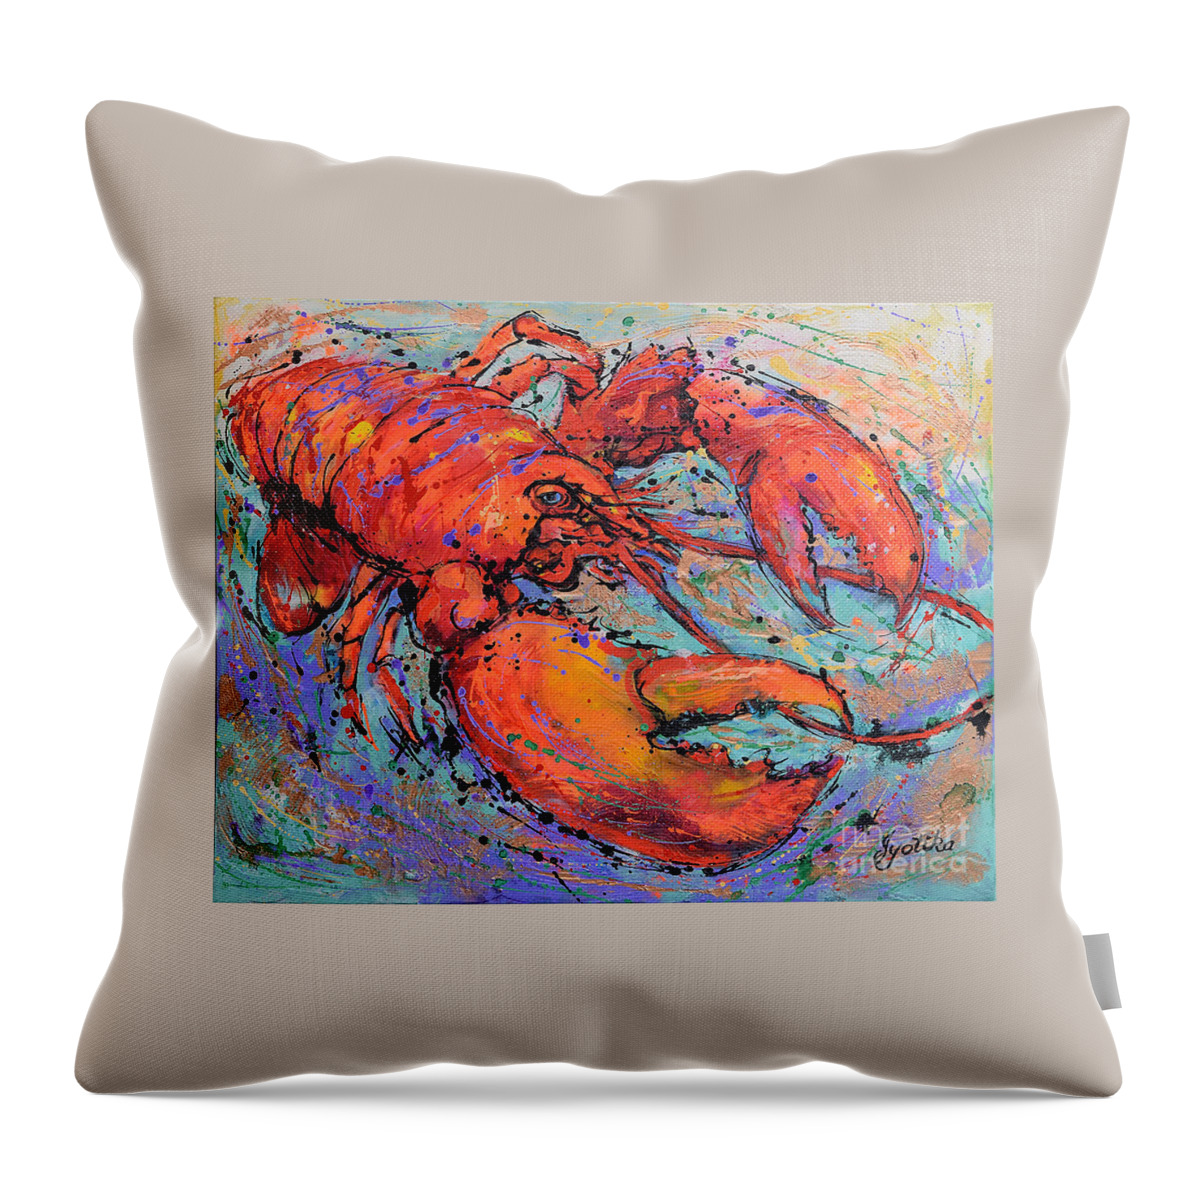  Throw Pillow featuring the painting Lobster by Jyotika Shroff